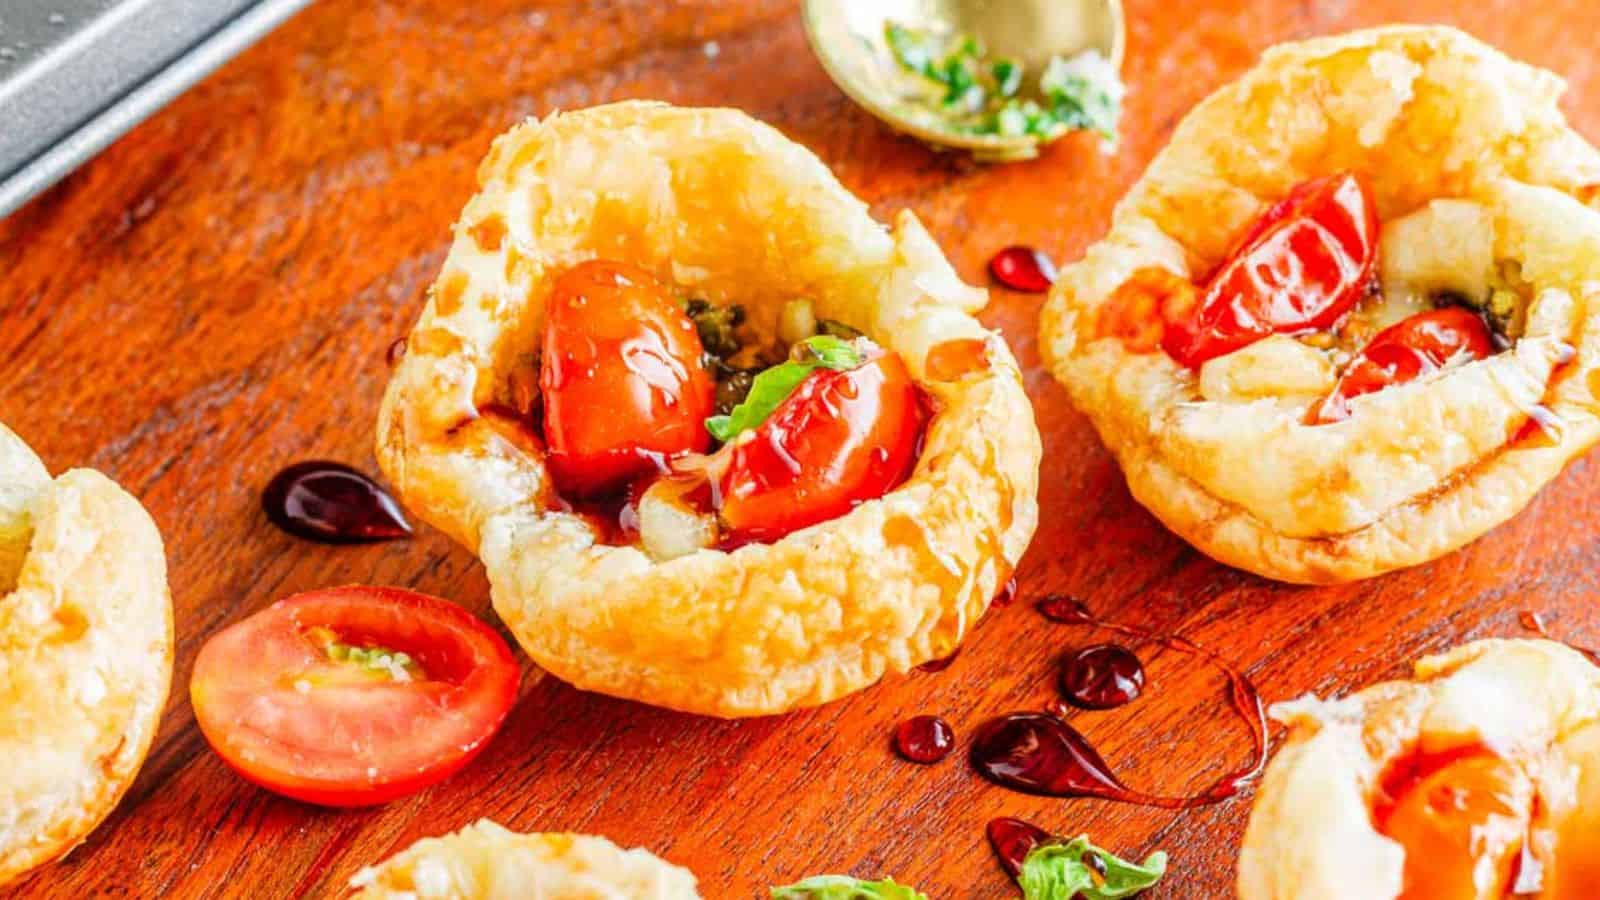 <p>Our Caprese Pesto Tarts are a delicious way to start any meal. They're bright with the flavors of fresh basil pesto and ripe tomatoes, not to mention the creamy mozzarella that ties everything together. These tarts are as lovely to look at as they are to eat. They make a great appetizer or light meal.<br><strong>Get the Recipe: </strong><a href="https://www.pocketfriendlyrecipes.com/caprese-pesto-tarts-recipe/?utm_source=msn&utm_medium=page&utm_campaign=">Caprese Pesto Tarts</a></p>